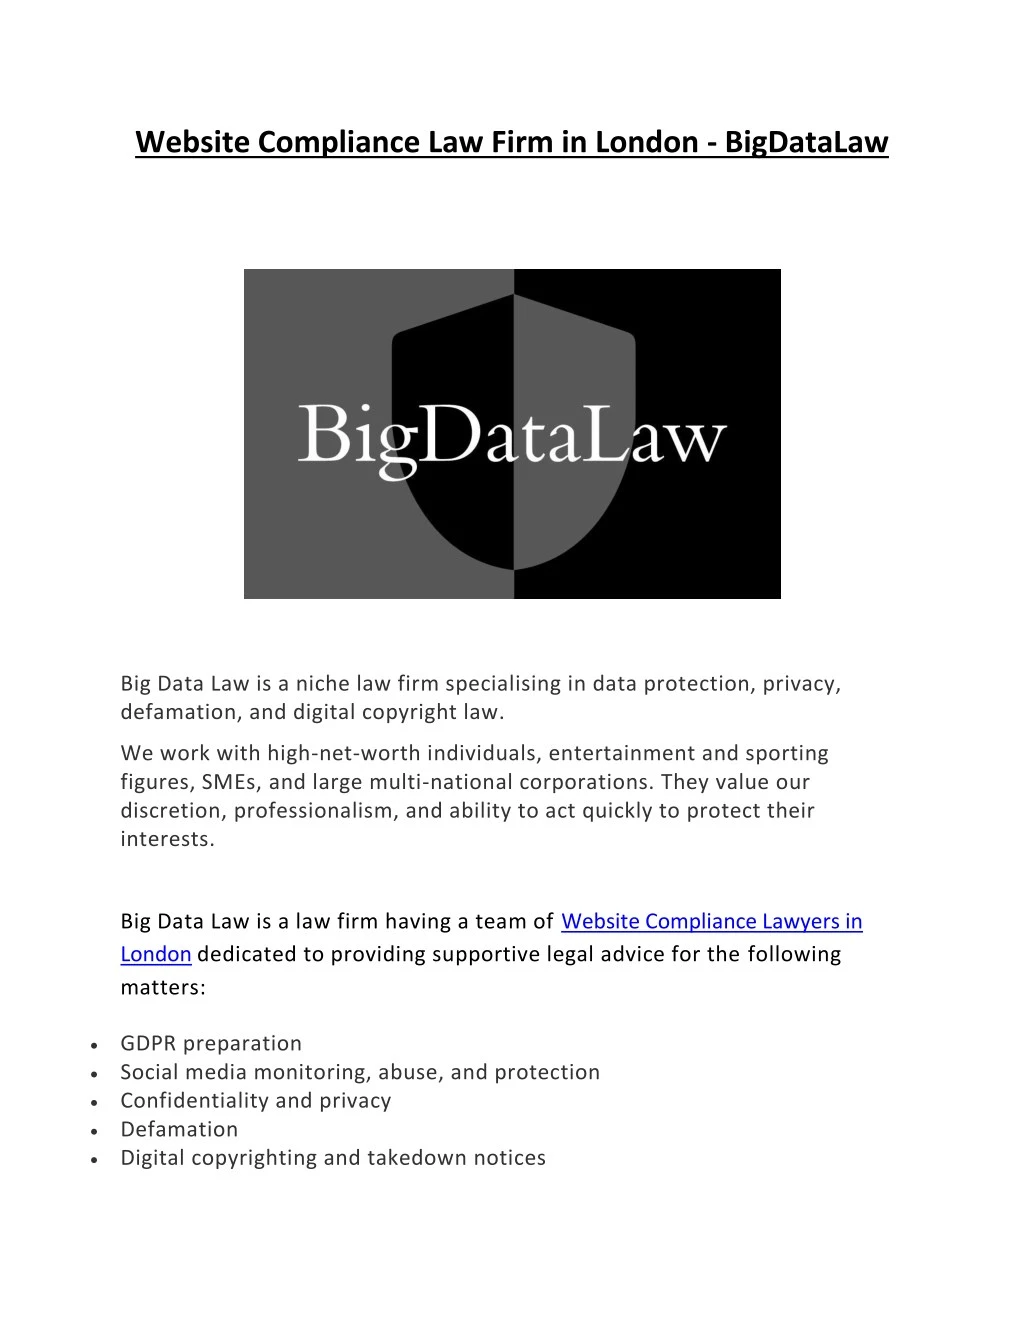 website compliance law firm in london bigdatalaw